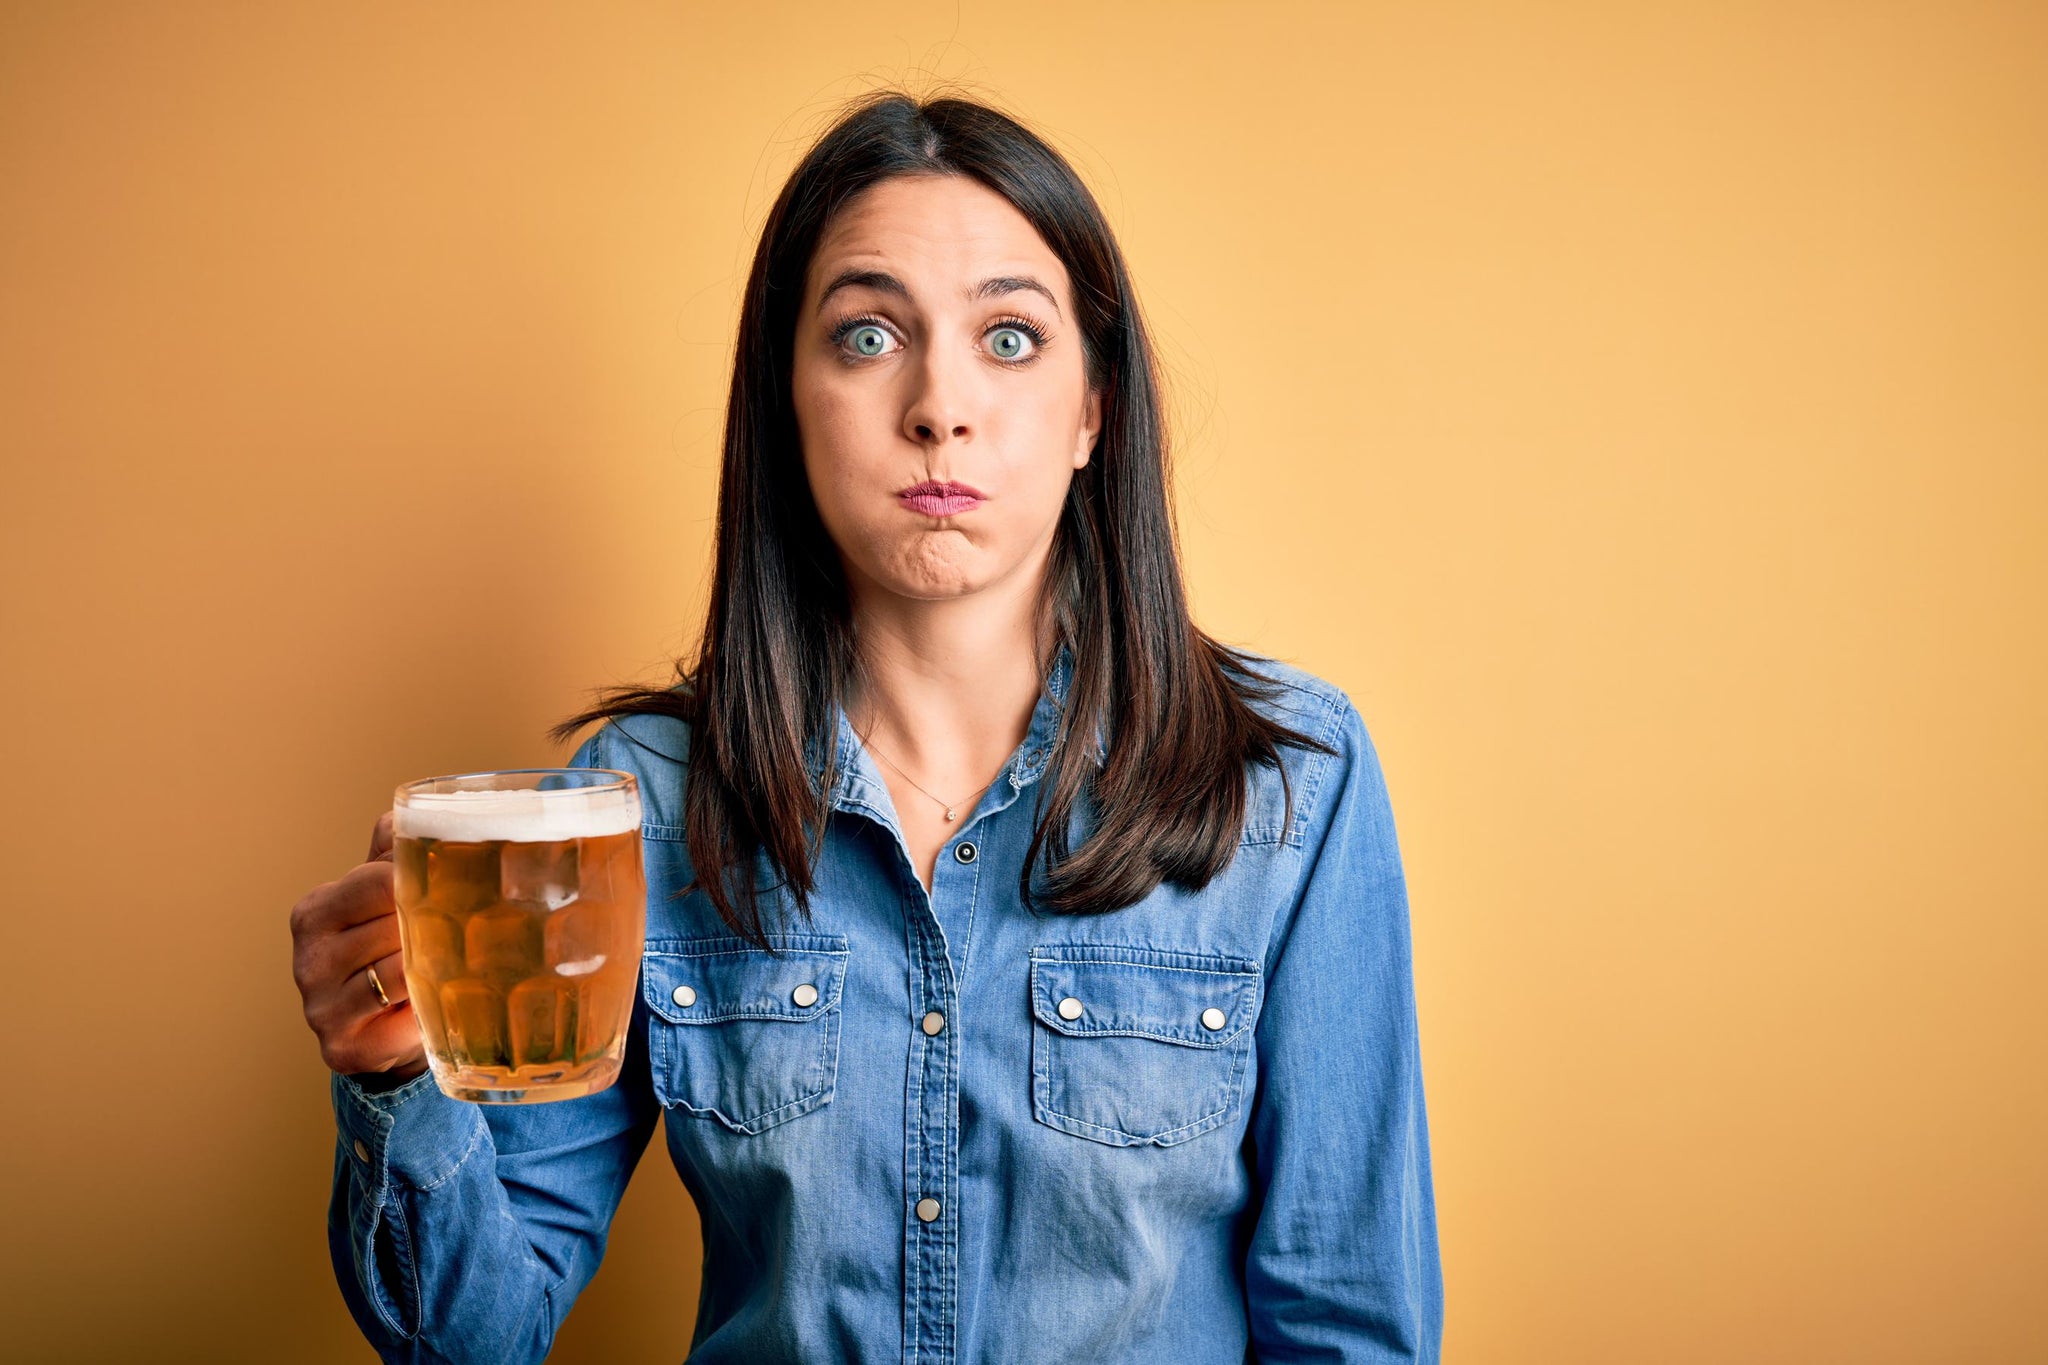 Does gluten free beer reduce bloating?